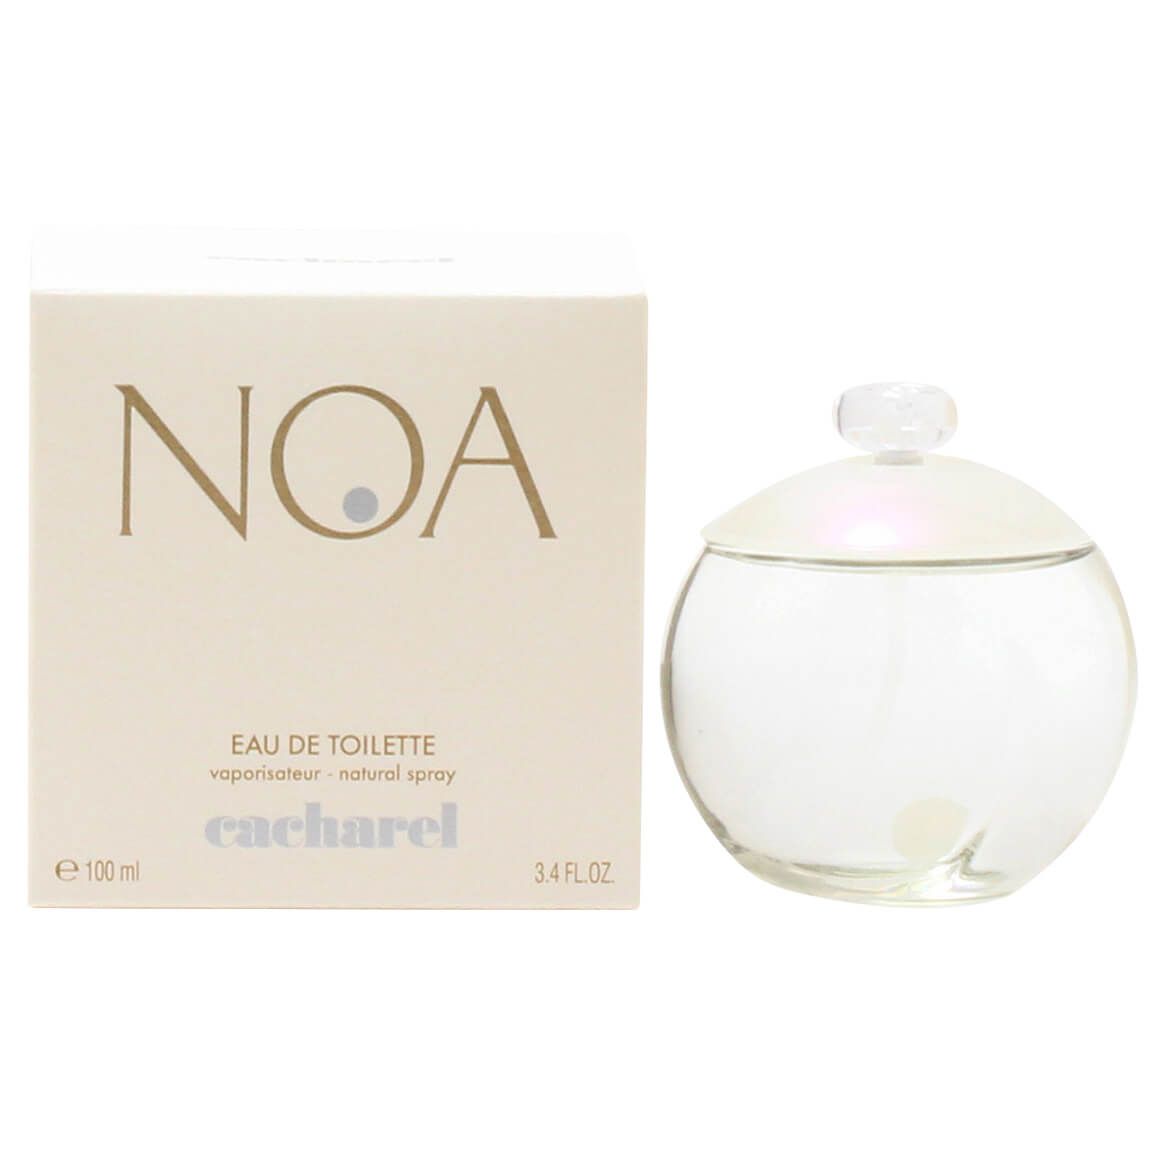 Noa by Cacharel for Women EDT, 3.4 fl. oz. + '-' + 377216